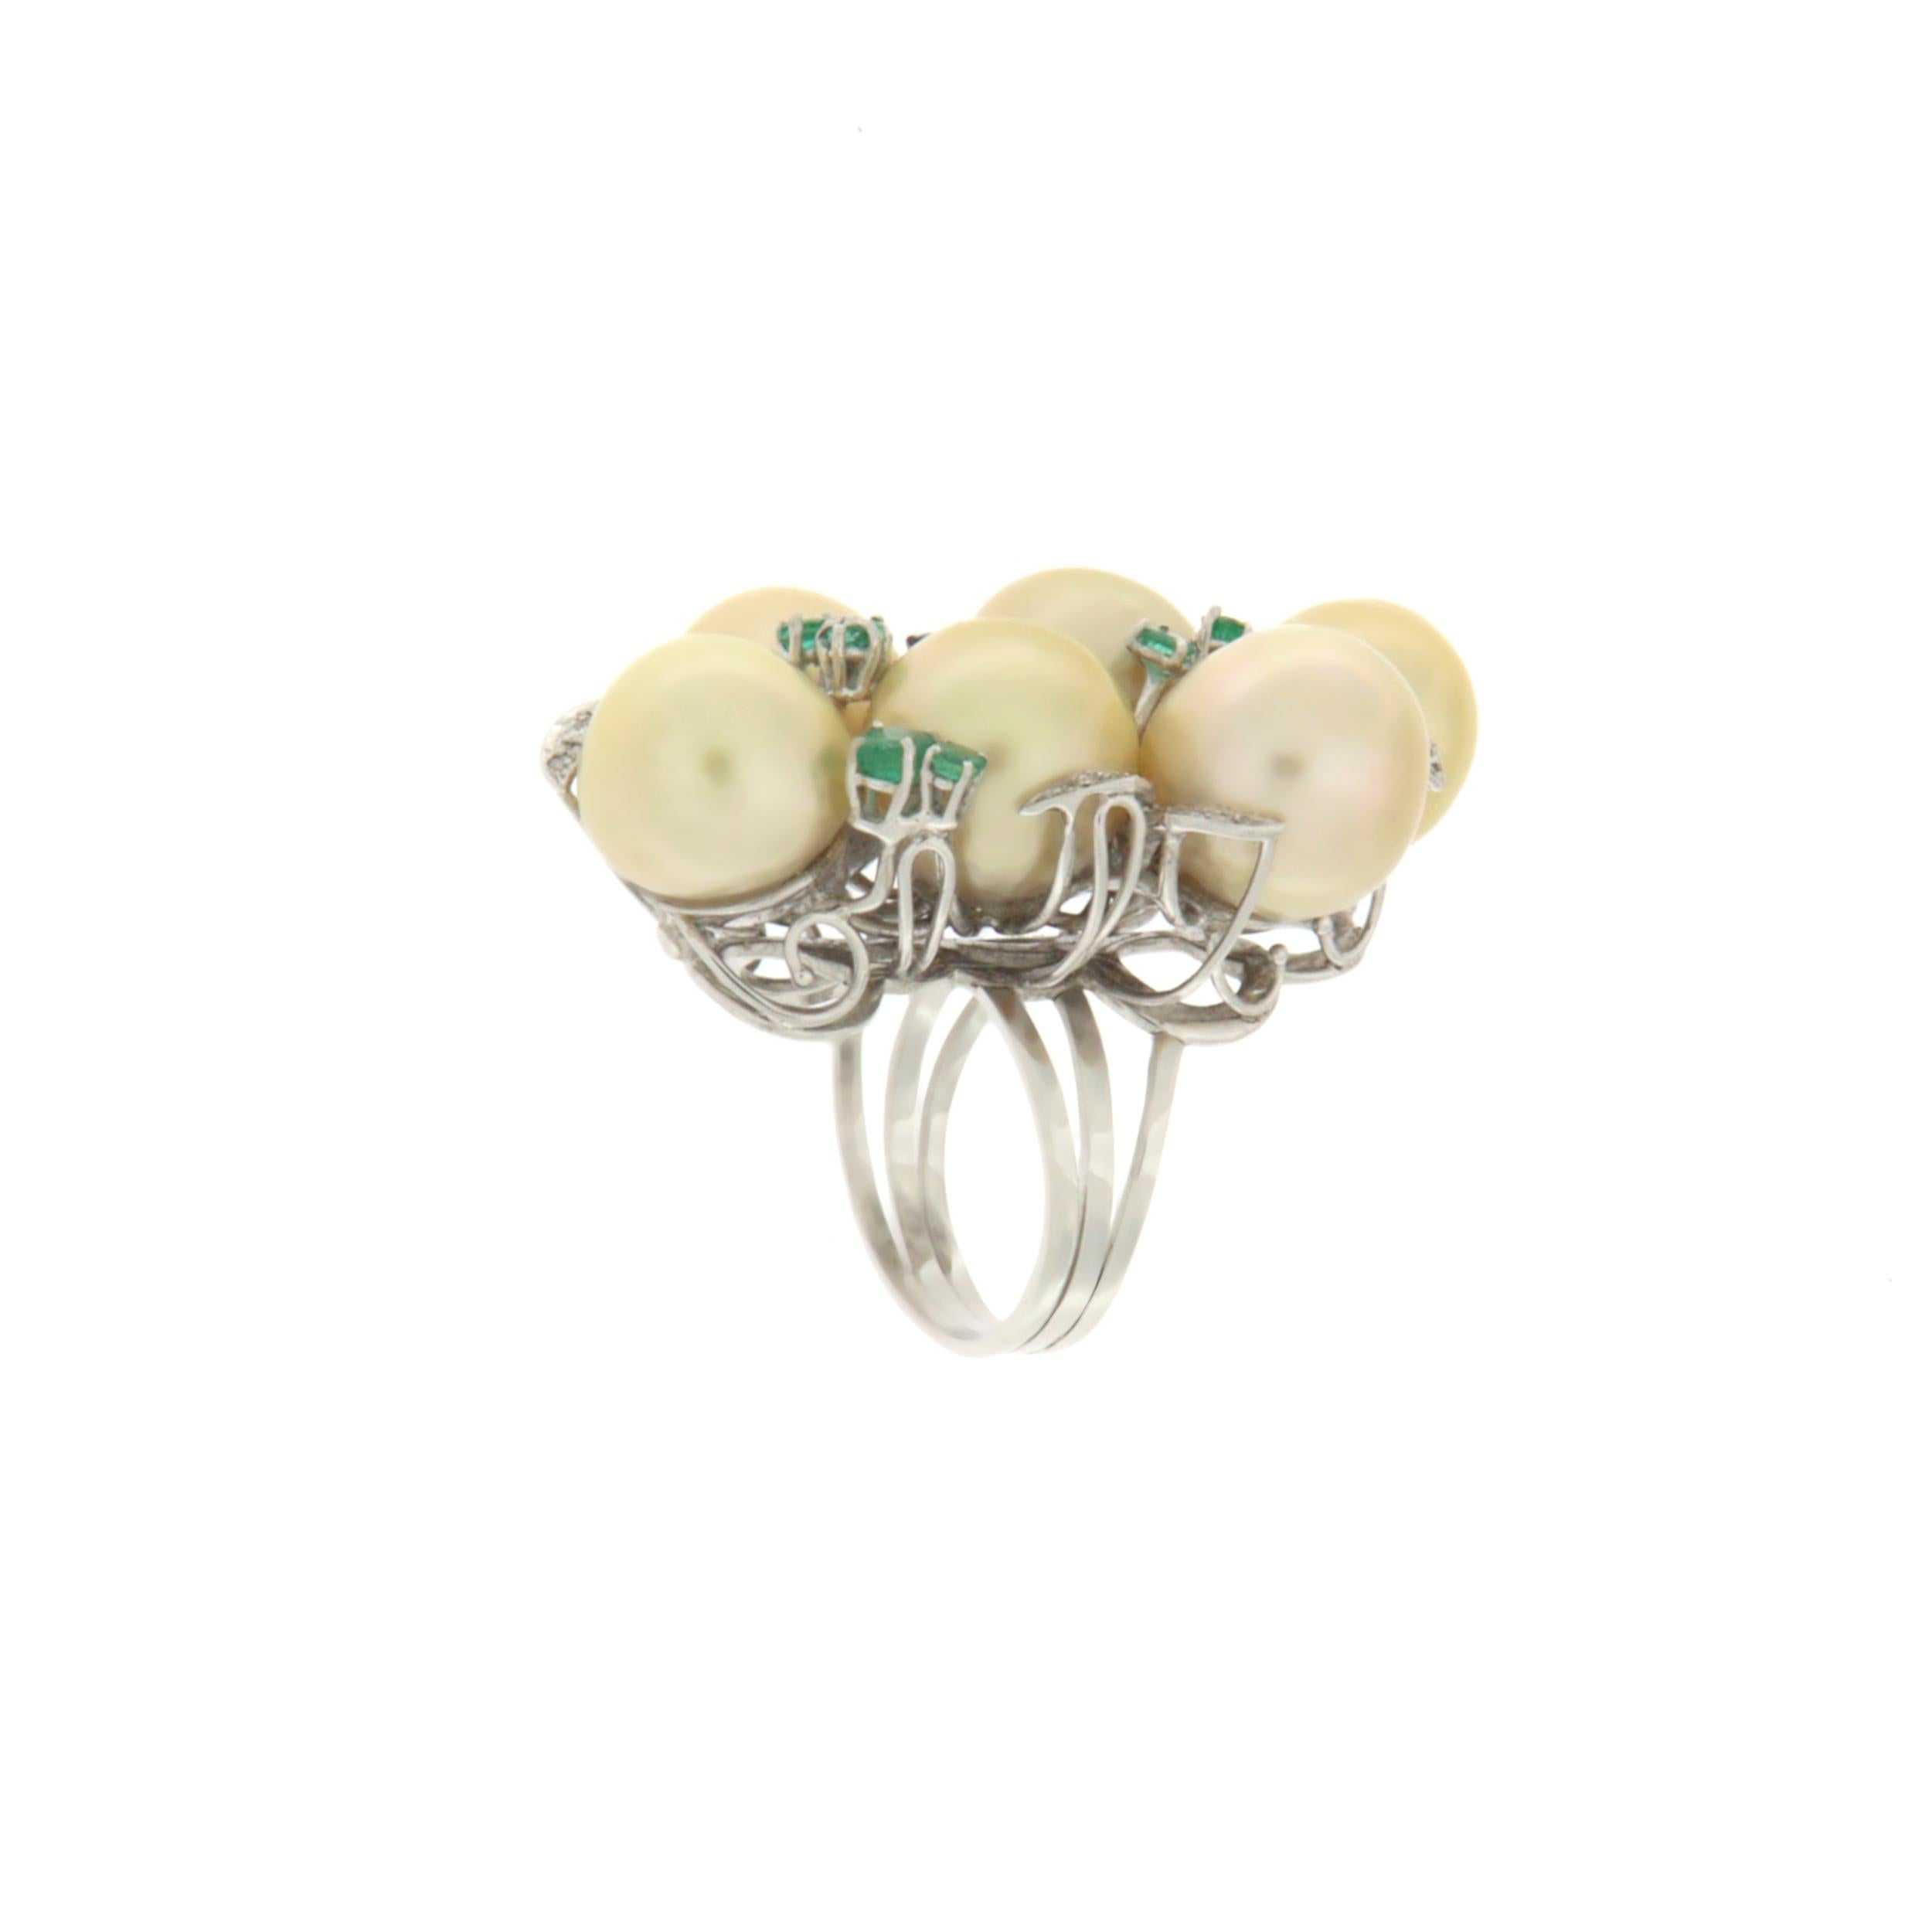 Contemporary Pearls Diamonds Emeralds Rubies Sapphires 18 Karats White Gold Cocktail Ring For Sale